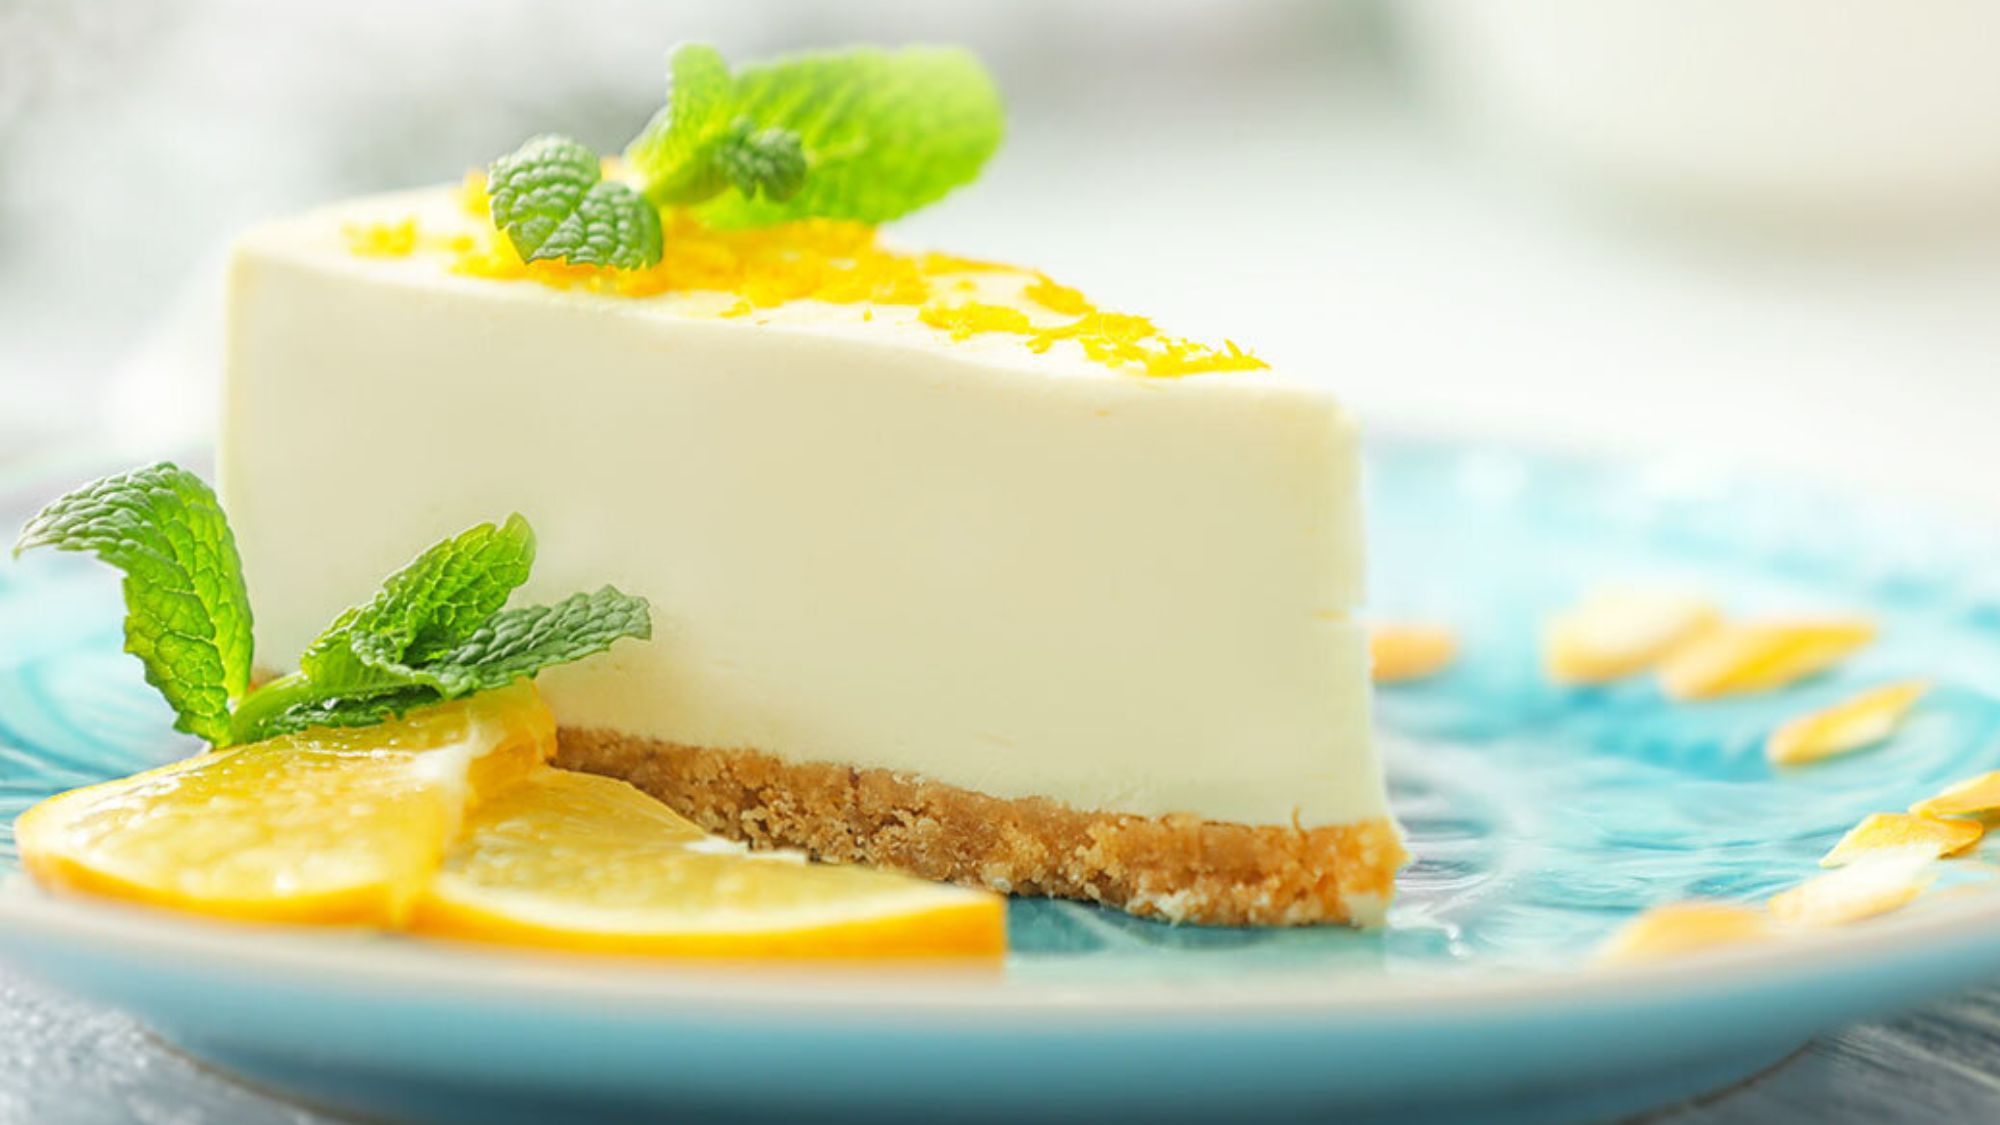 Delicious cheesecake along with lemon zest perfect summer desserts